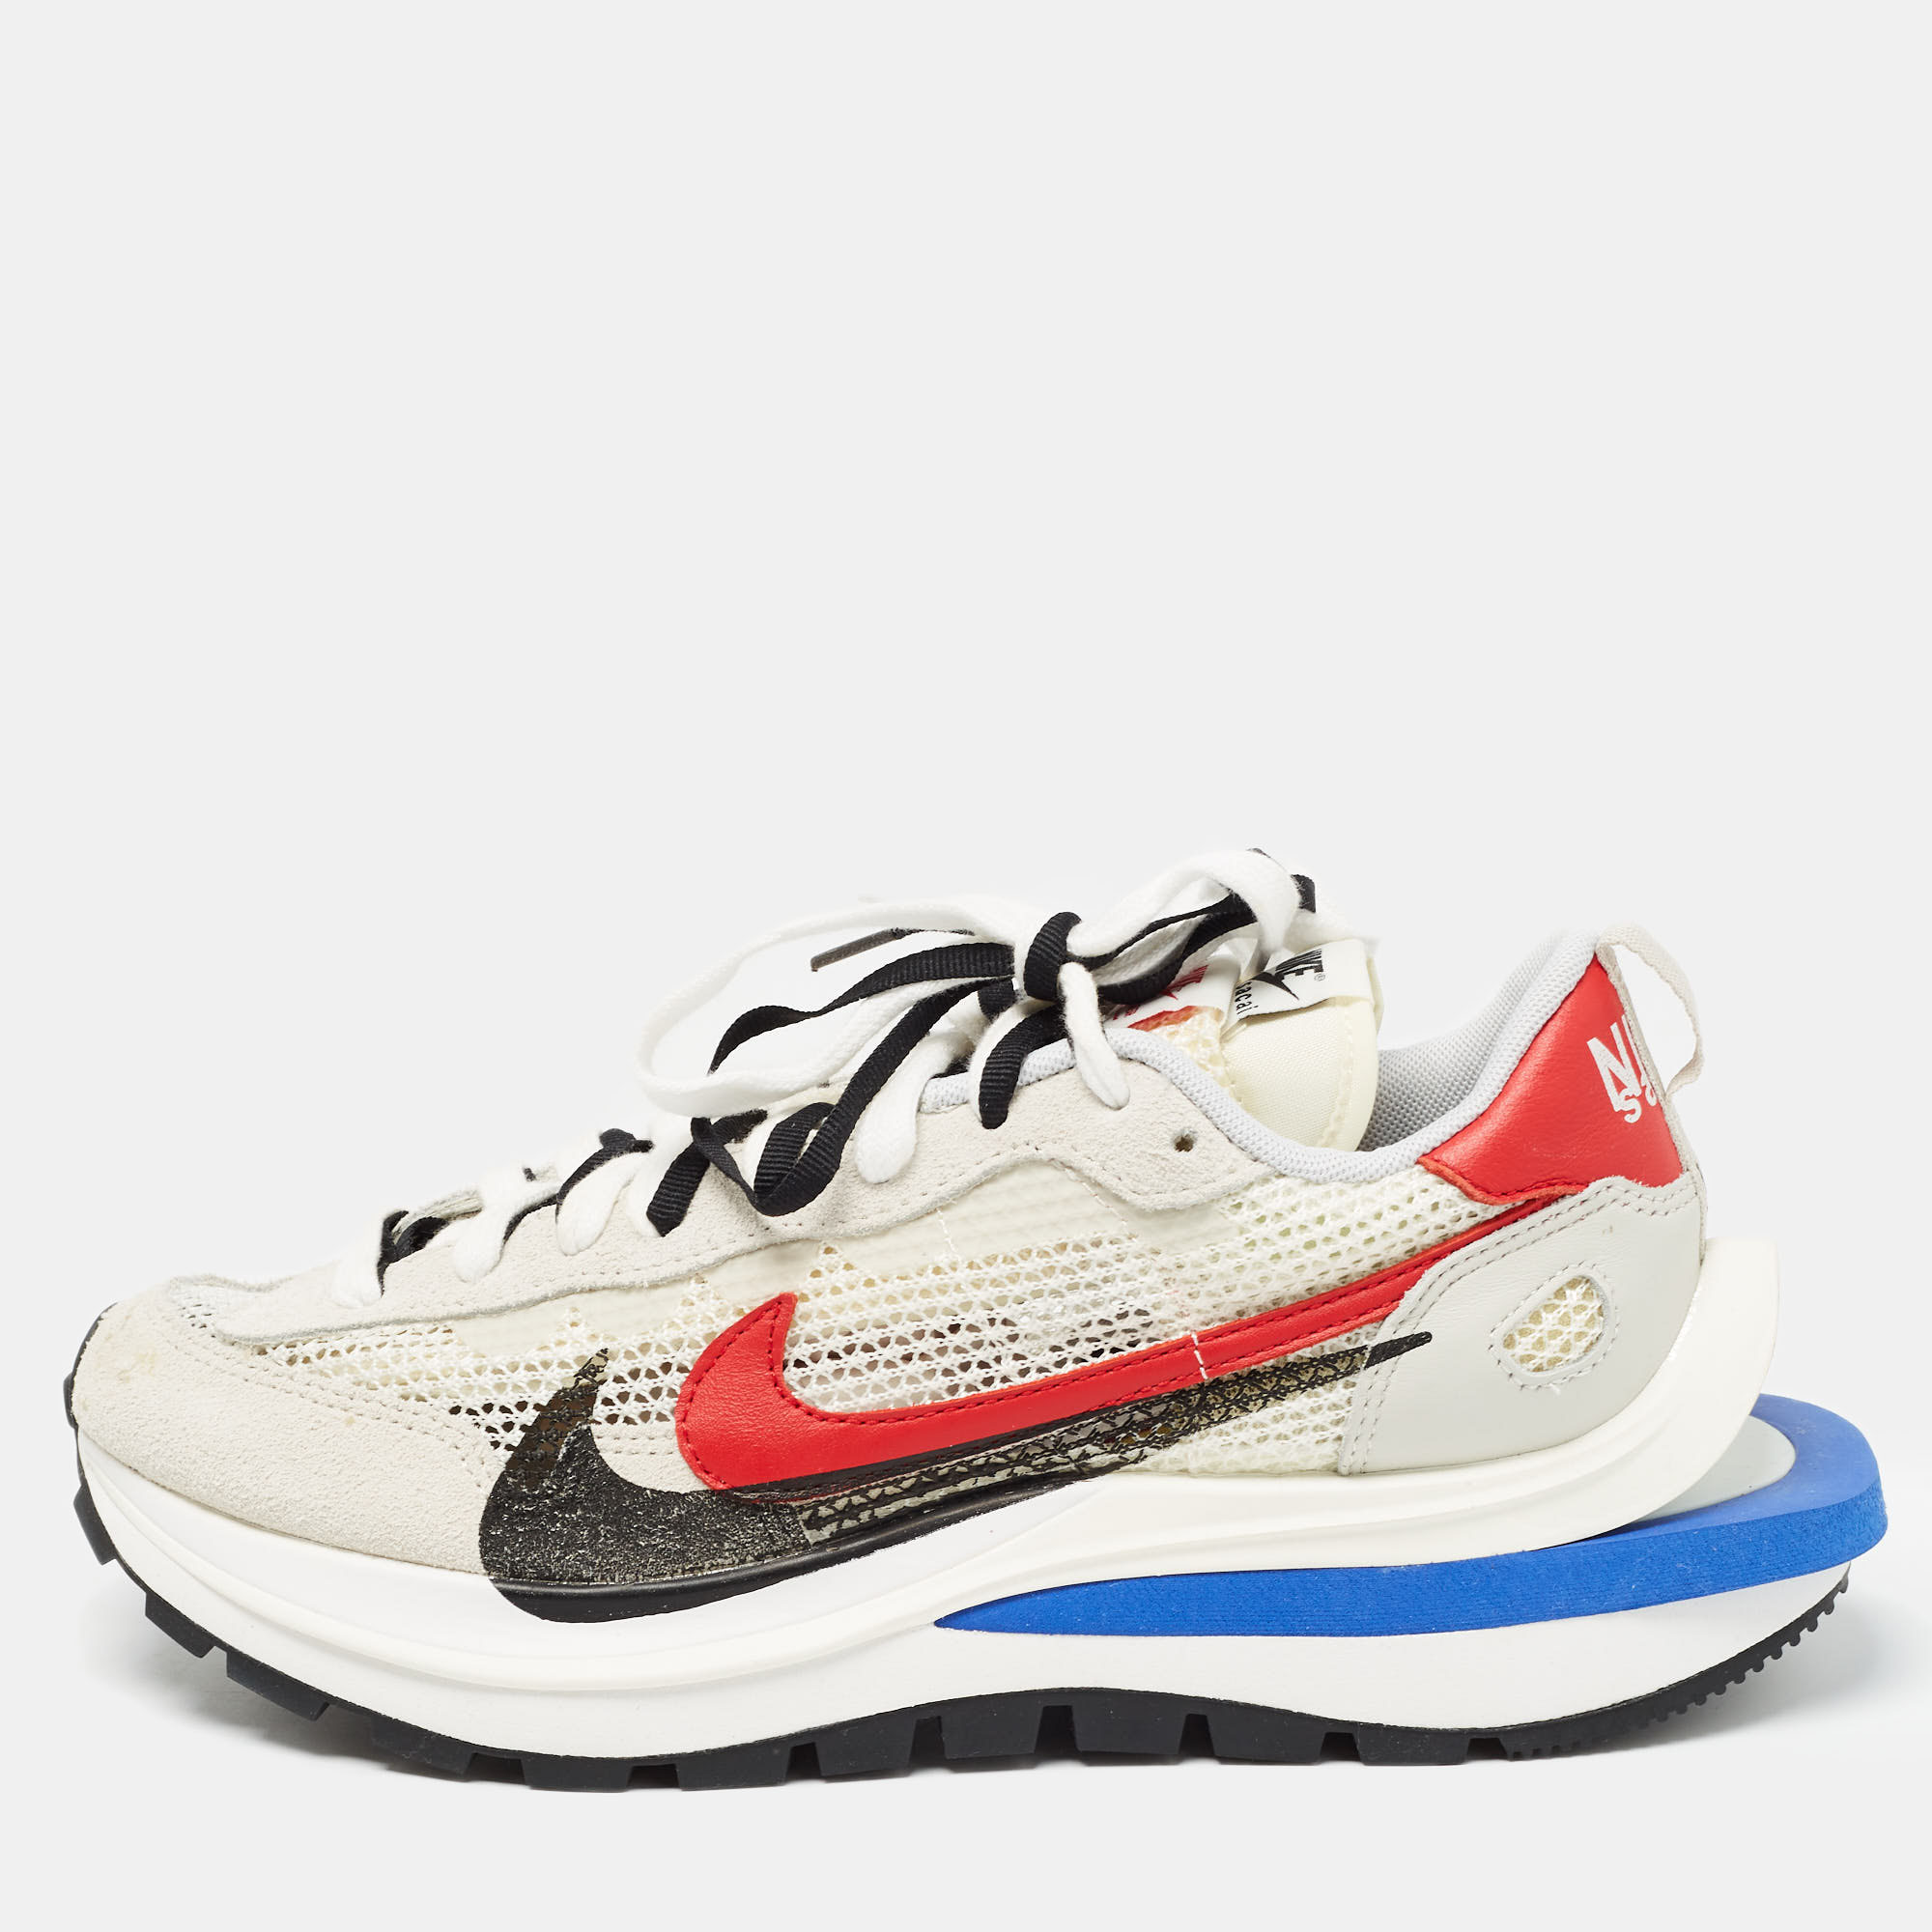 

Nike x Sacai Multicolor Mesh and Suede Vaporwaffle Sneakers Size